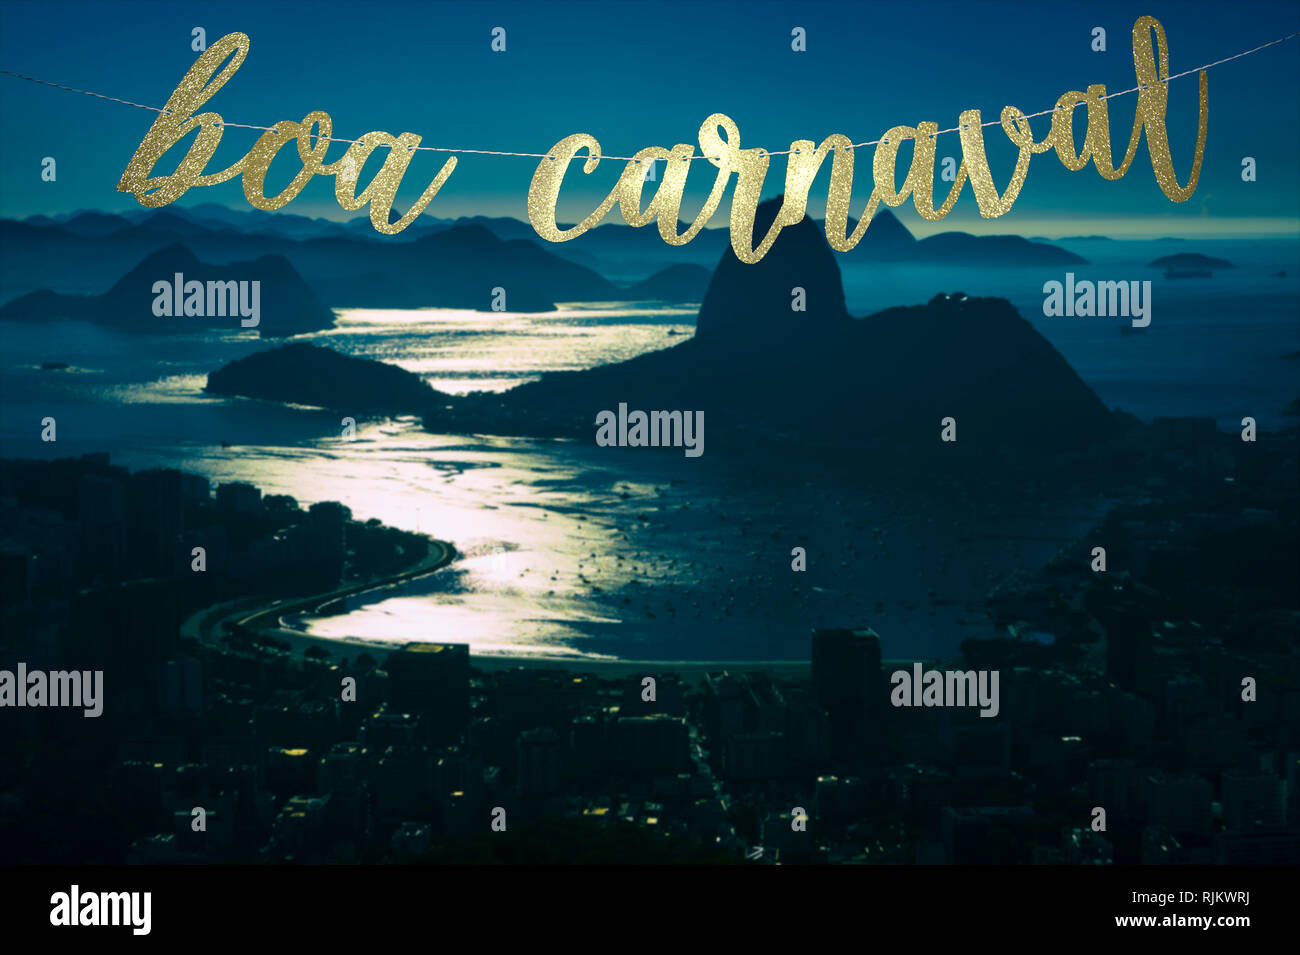 Boa Carnaval (Happy Carnival in Portuguese) gold glitter banner hanging above a moonlit Rio de Janeiro skyline with Sugarloaf Mountain at night Stock Photo